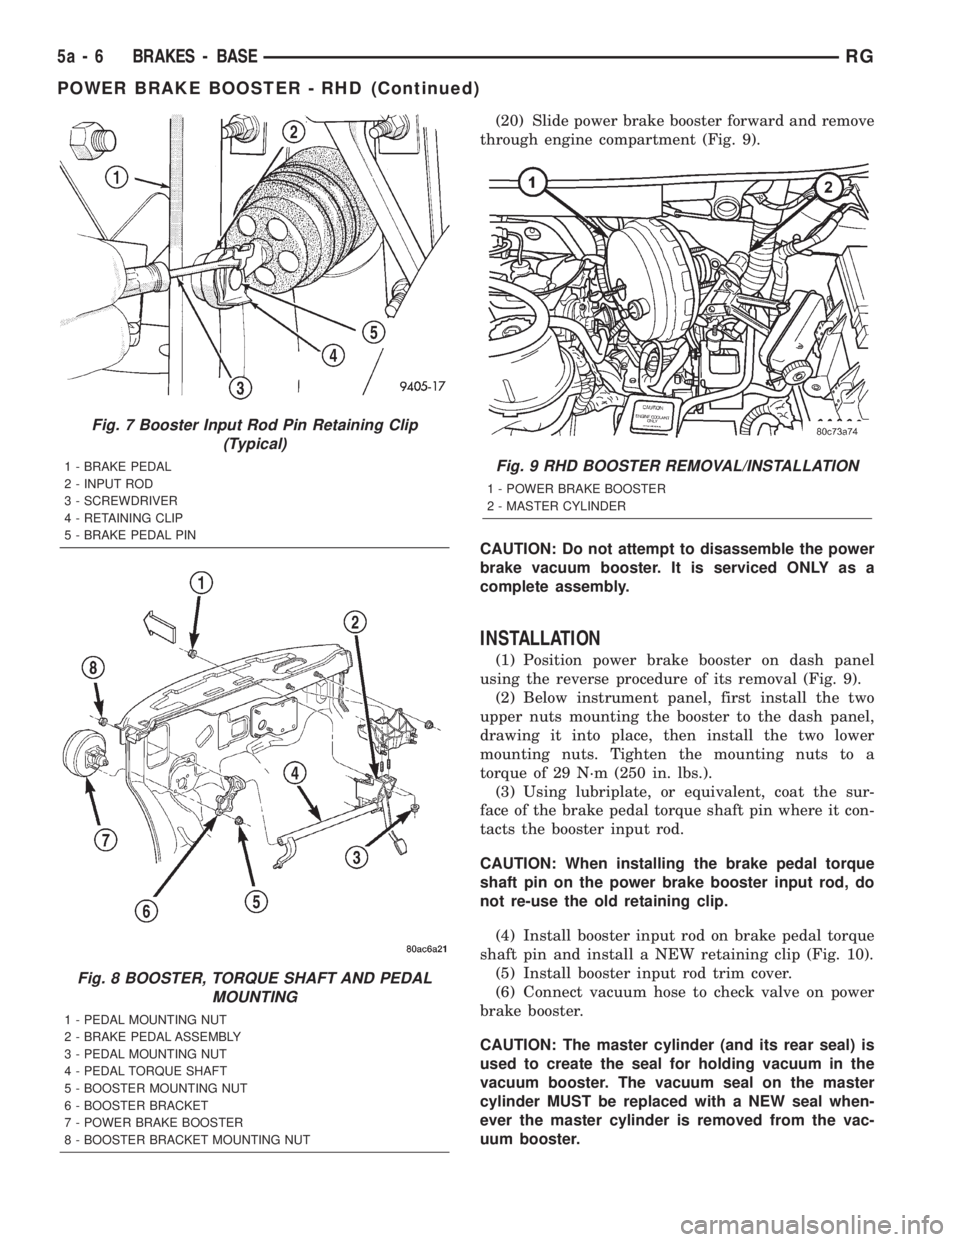 CHRYSLER VOYAGER 2001  Service Manual (20) Slide power brake booster forward and remove
through engine compartment (Fig. 9).
CAUTION: Do not attempt to disassemble the power
brake vacuum booster. It is serviced ONLY as a
complete assembly